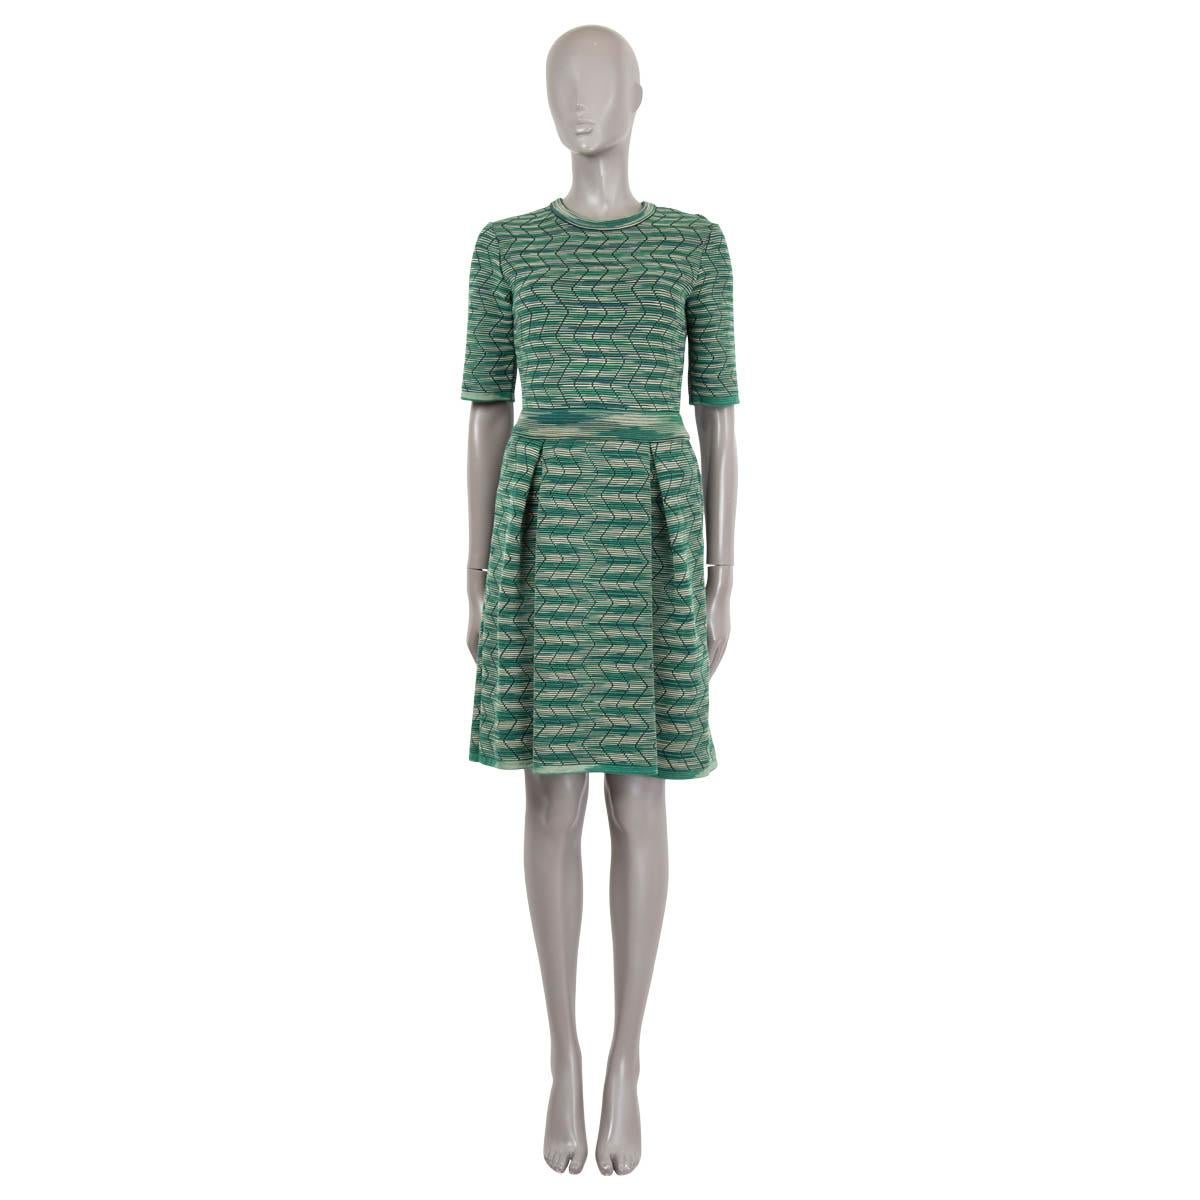 100% authentic M Missoni zig zag jacquard flared dress in green, beige and black striped polyamide (37%), viscose (30%), wool (33%) and viscose (30%). Features short sleeves and box pleats on the skirt. Unlined. Has been worn and is in excellent